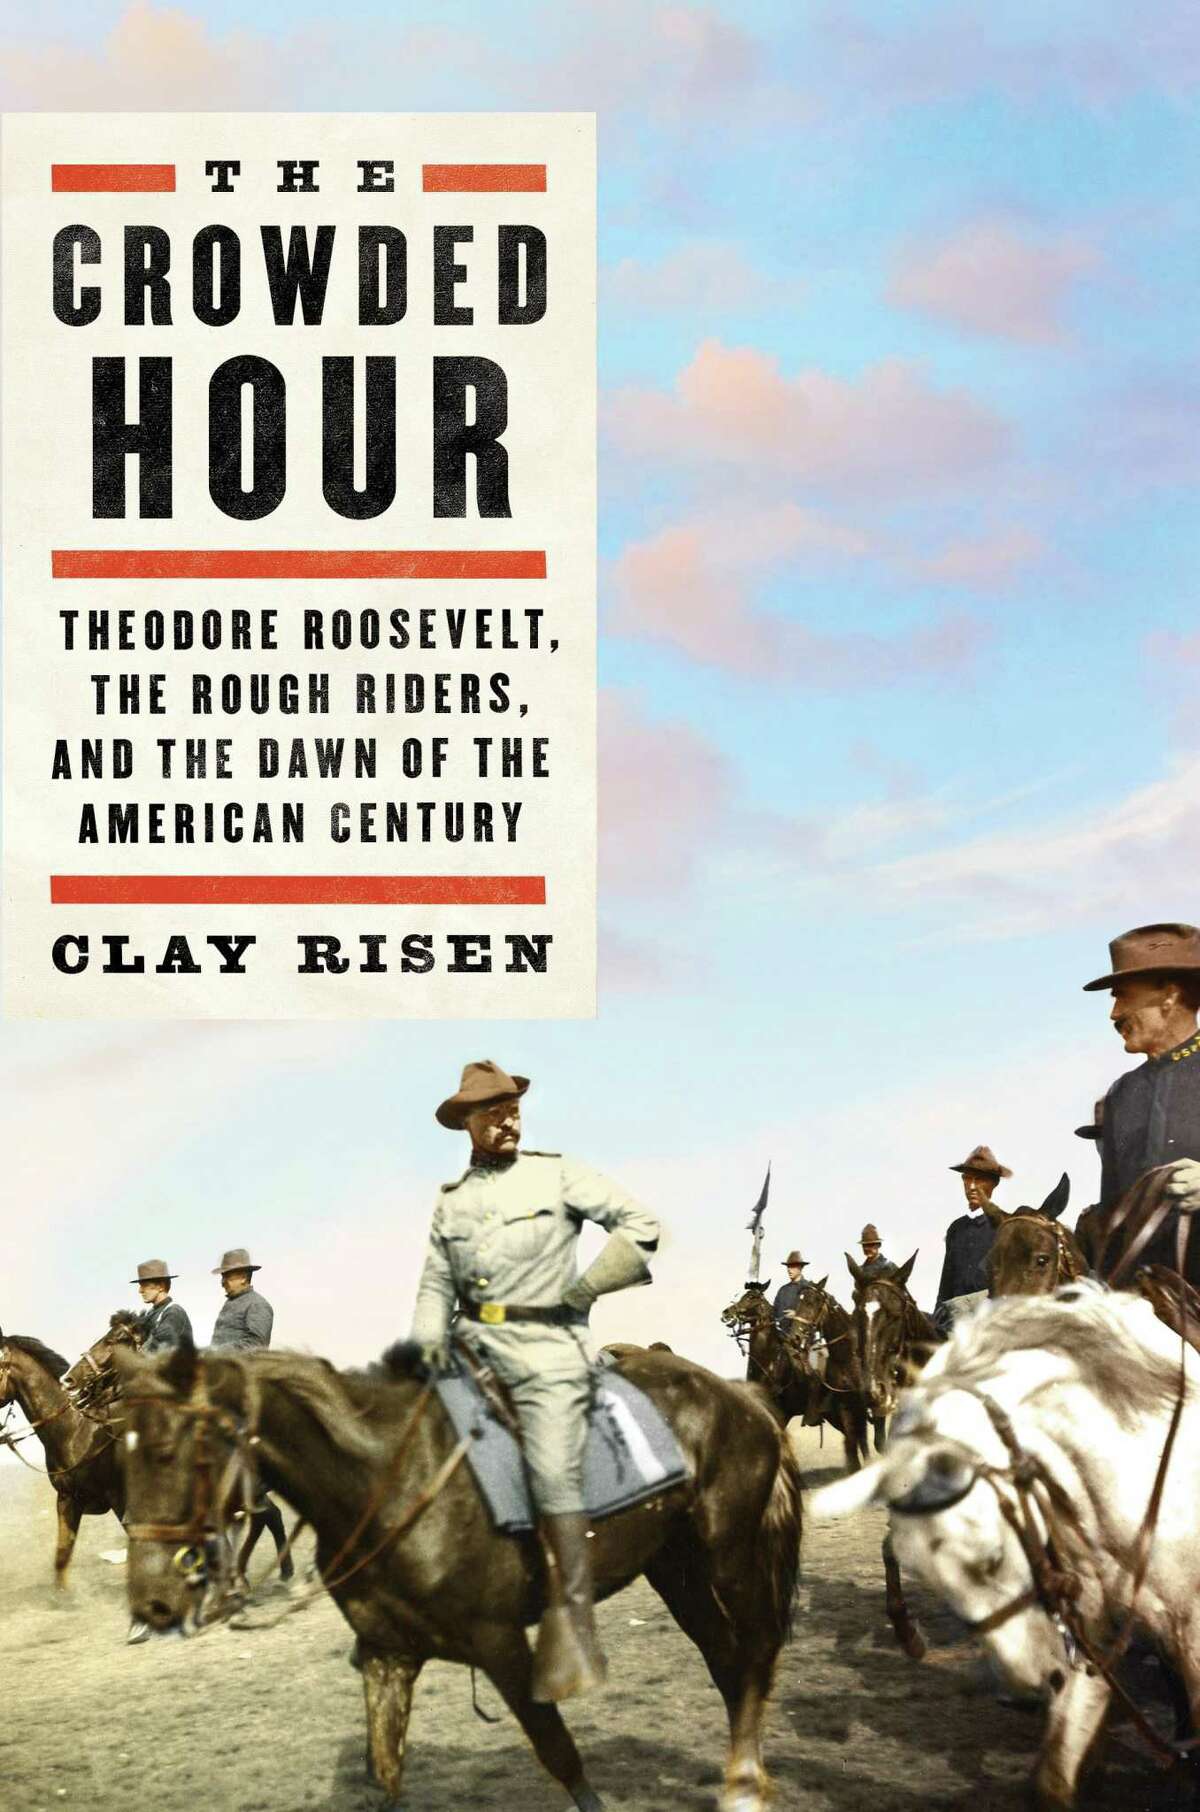 Cover of The Crowded Hour: Theodore Roosevelt, the Rough Riders and the Dawn of the American Century by historian Clay Risen